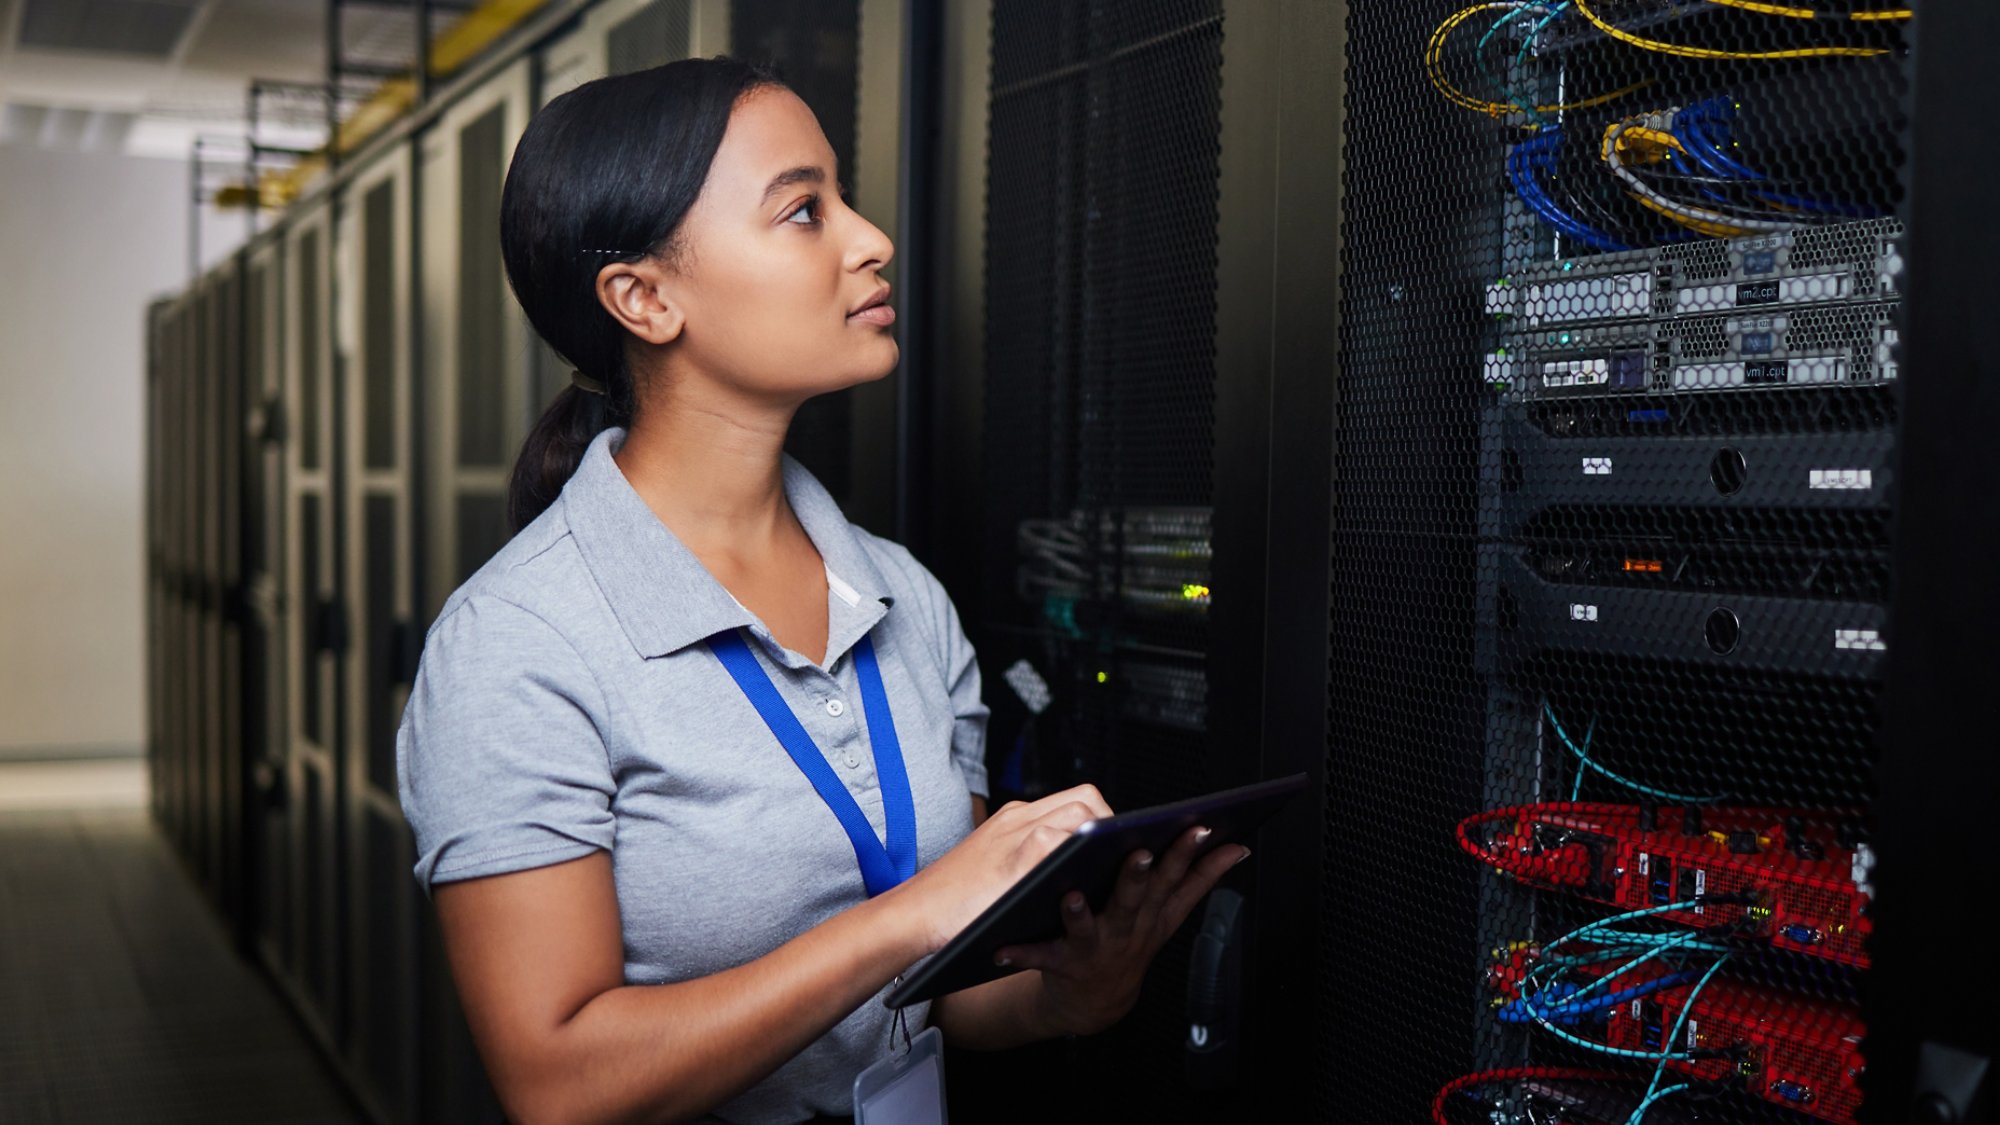 Woman, engineering tablet and server room, data center inspection or system solution for cybersecurity coding. IT person on digital technology, cables check and business power or programming hardware.